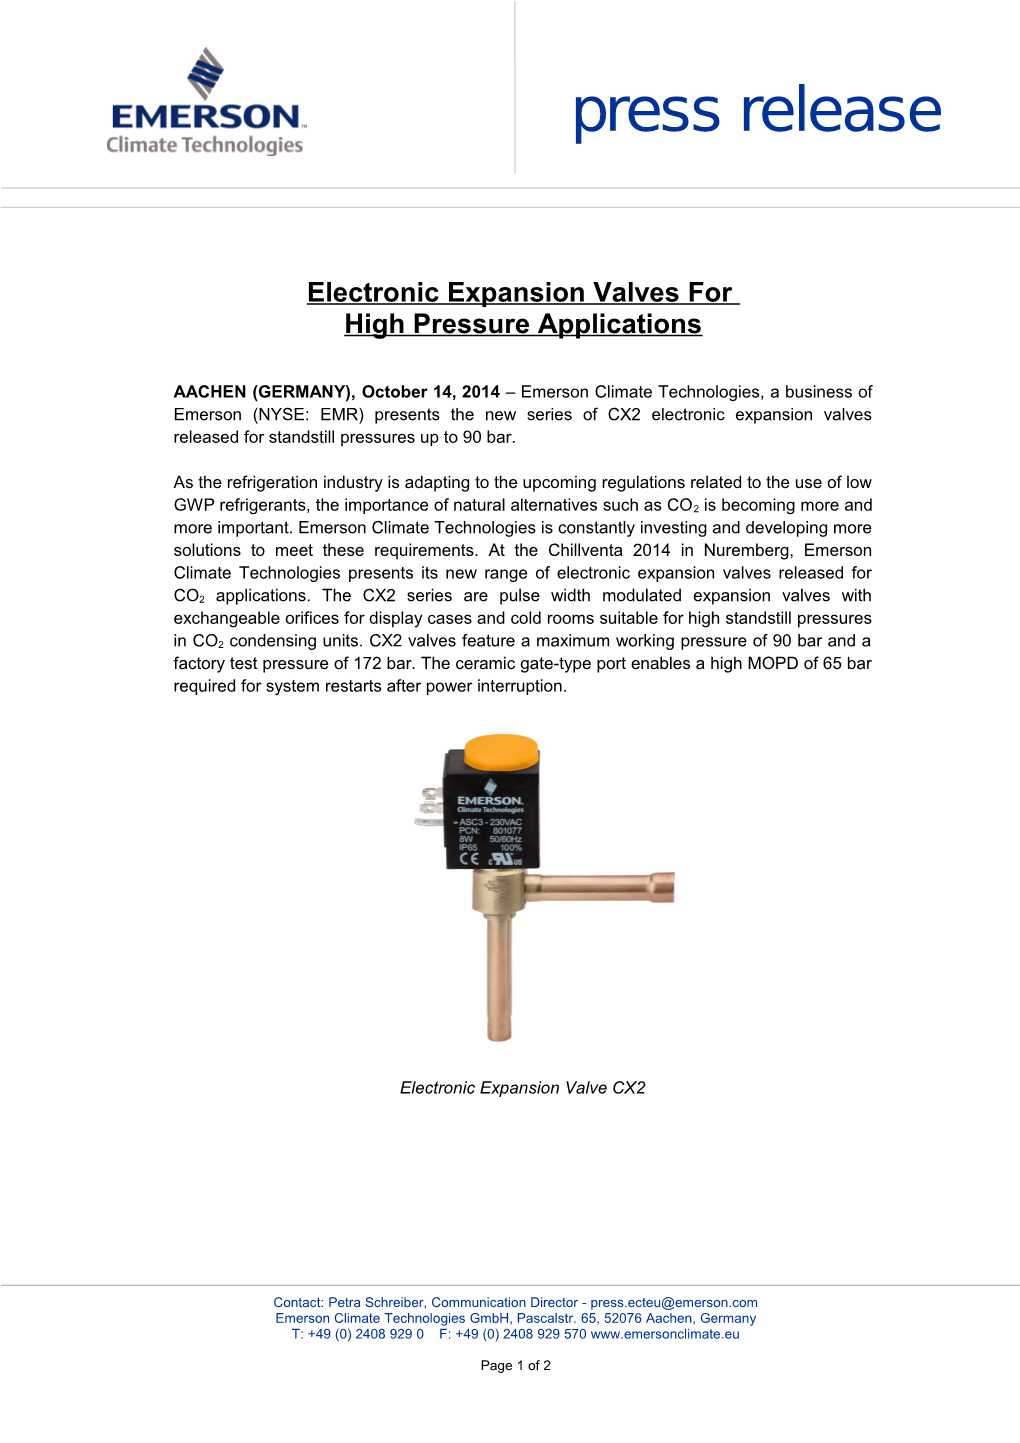 Electronic Expansion Valves for High Pressure Applications